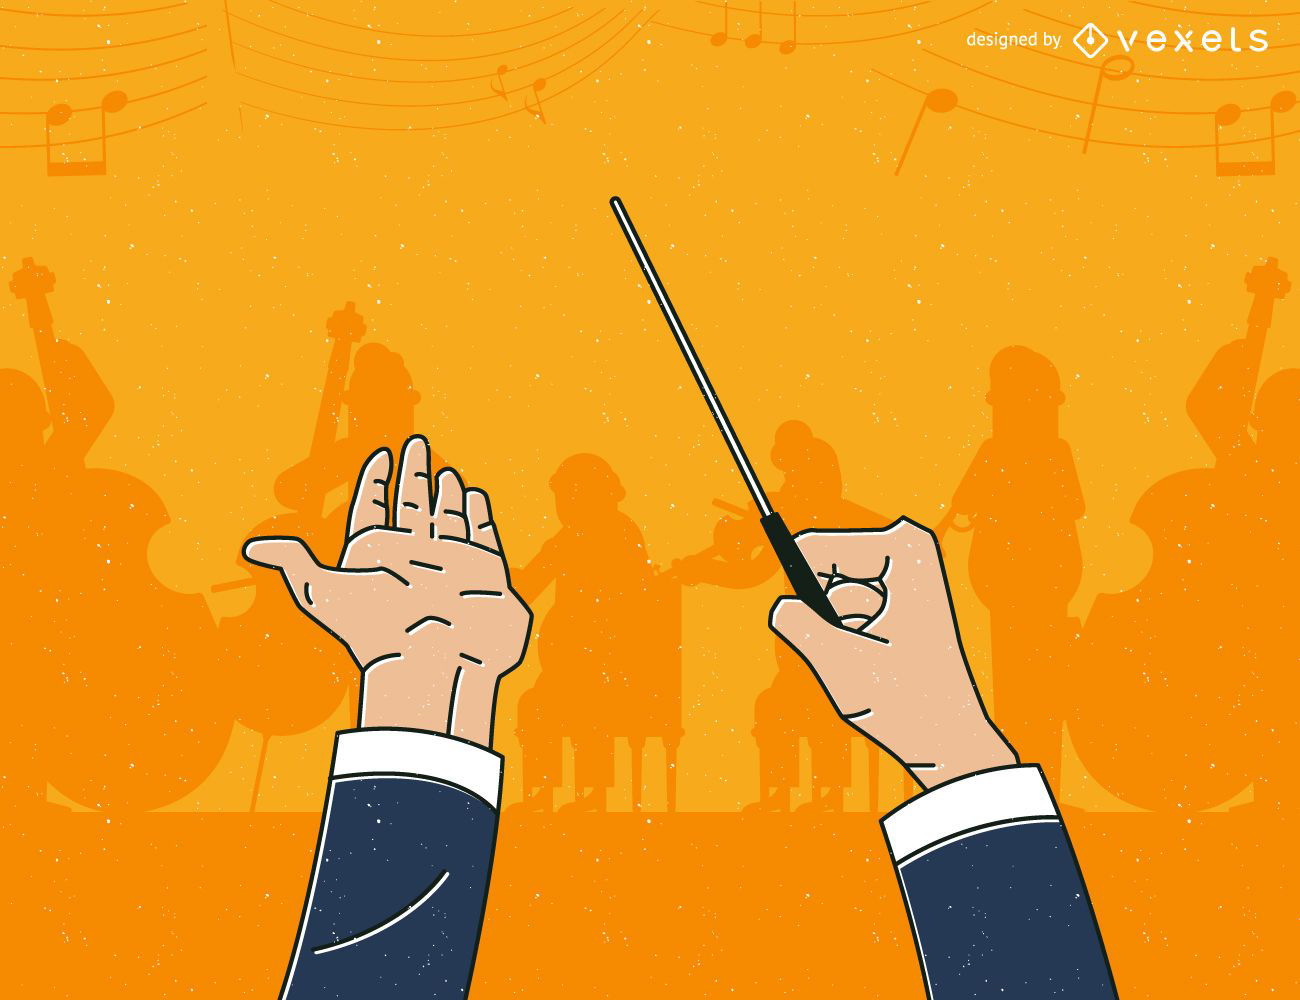 Illustrated orchestra conductor